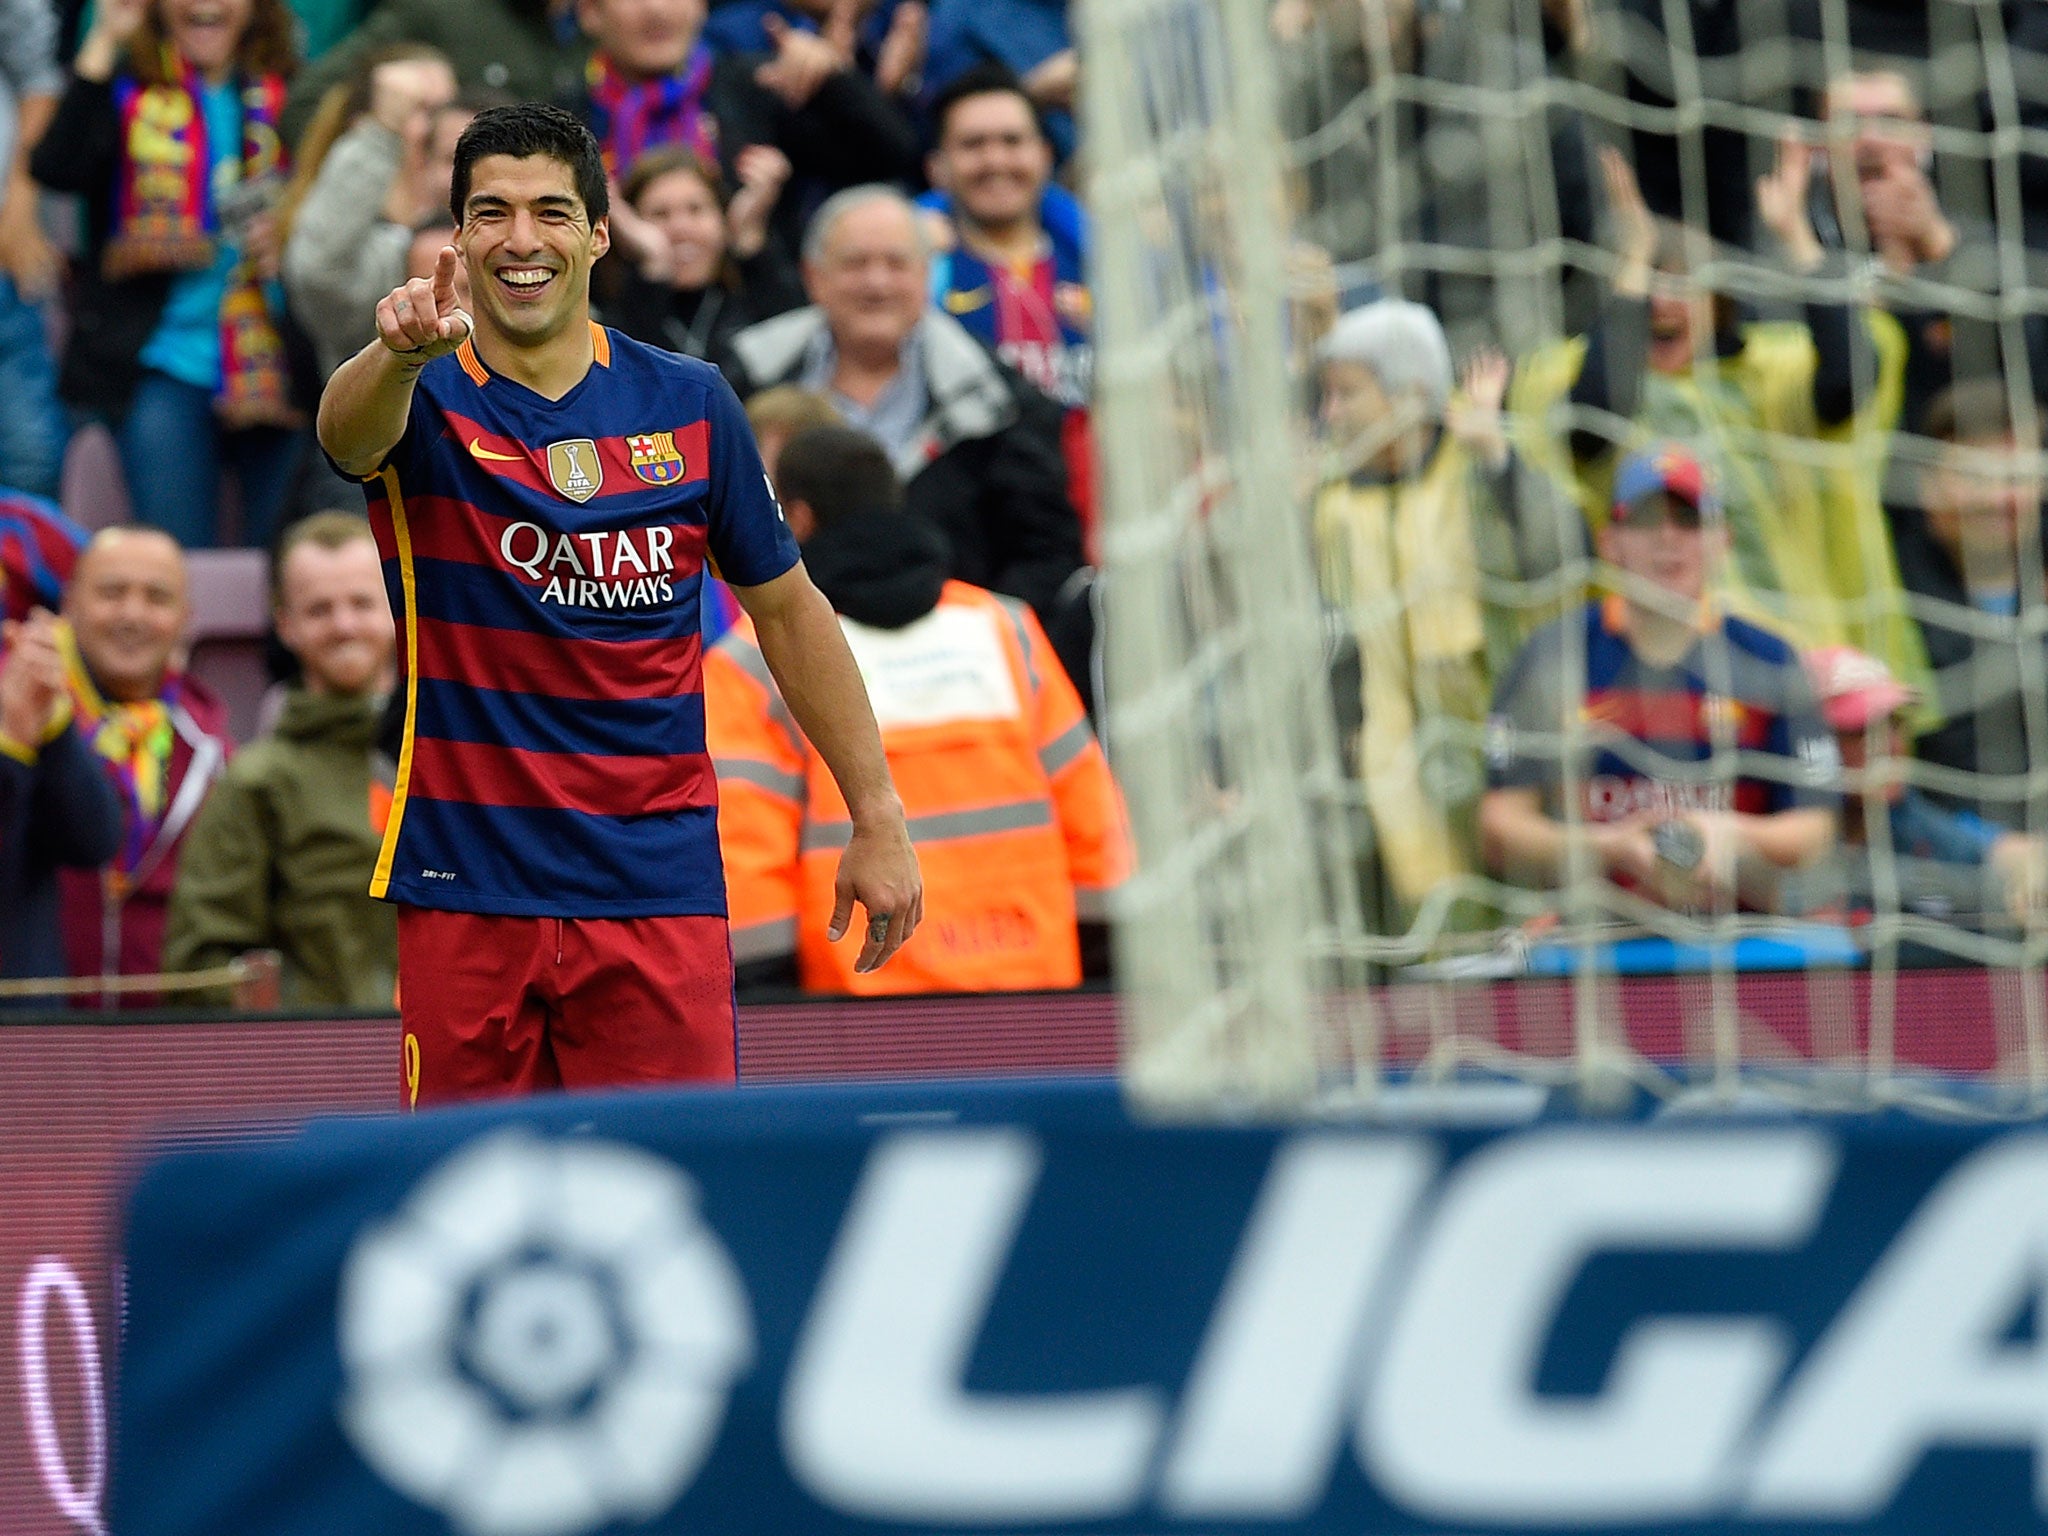 Luis Suarez will be looking to lead Barcelona to the title